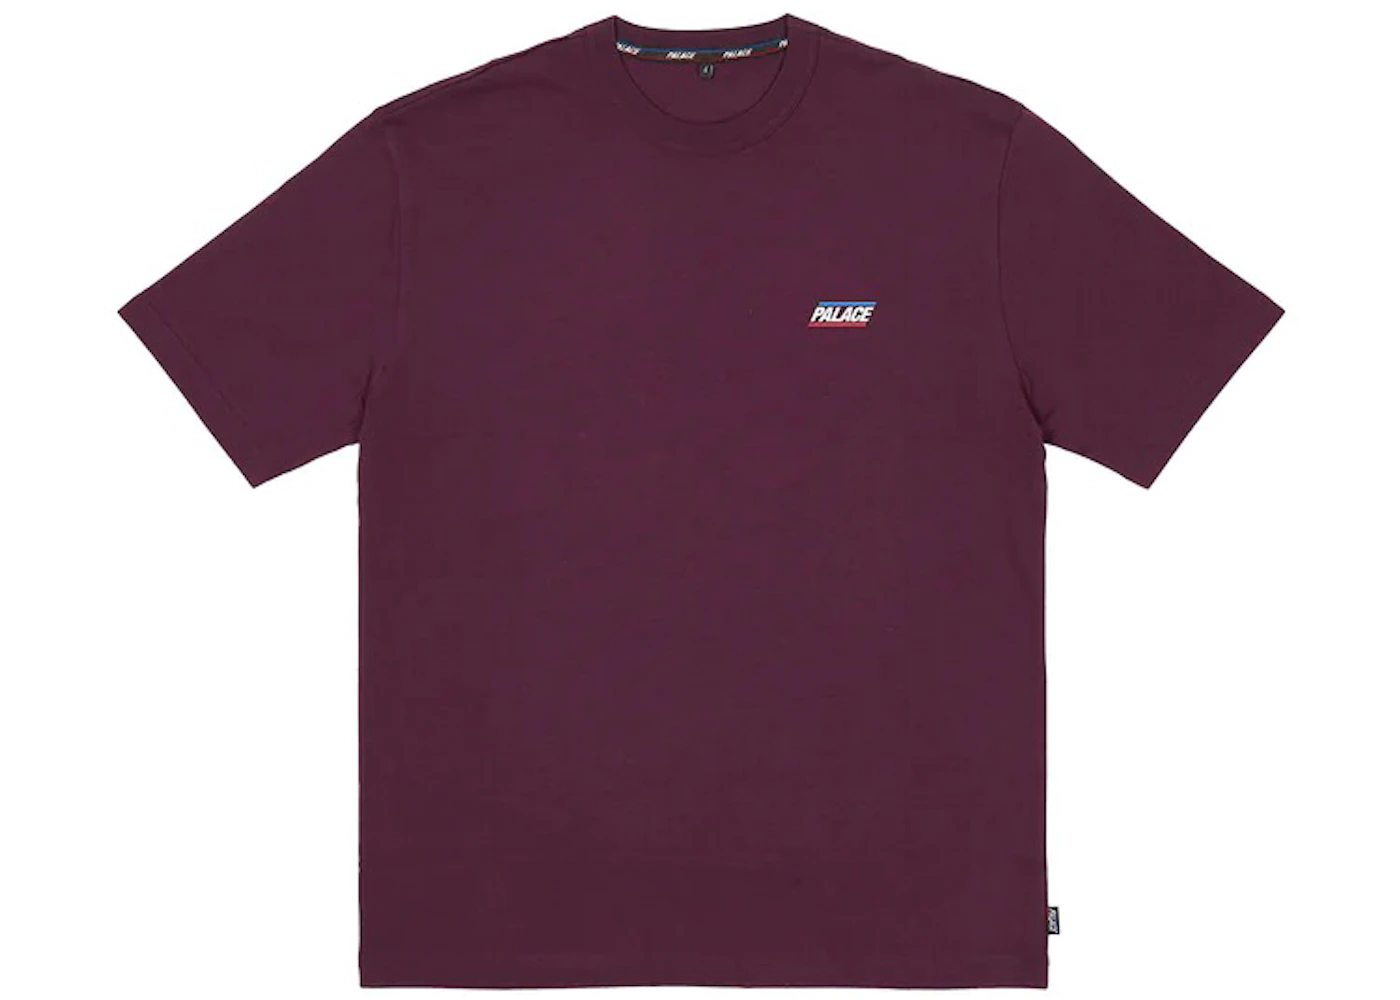 Palace Basically A T-shirt Red Wine Men's - SS23 - US